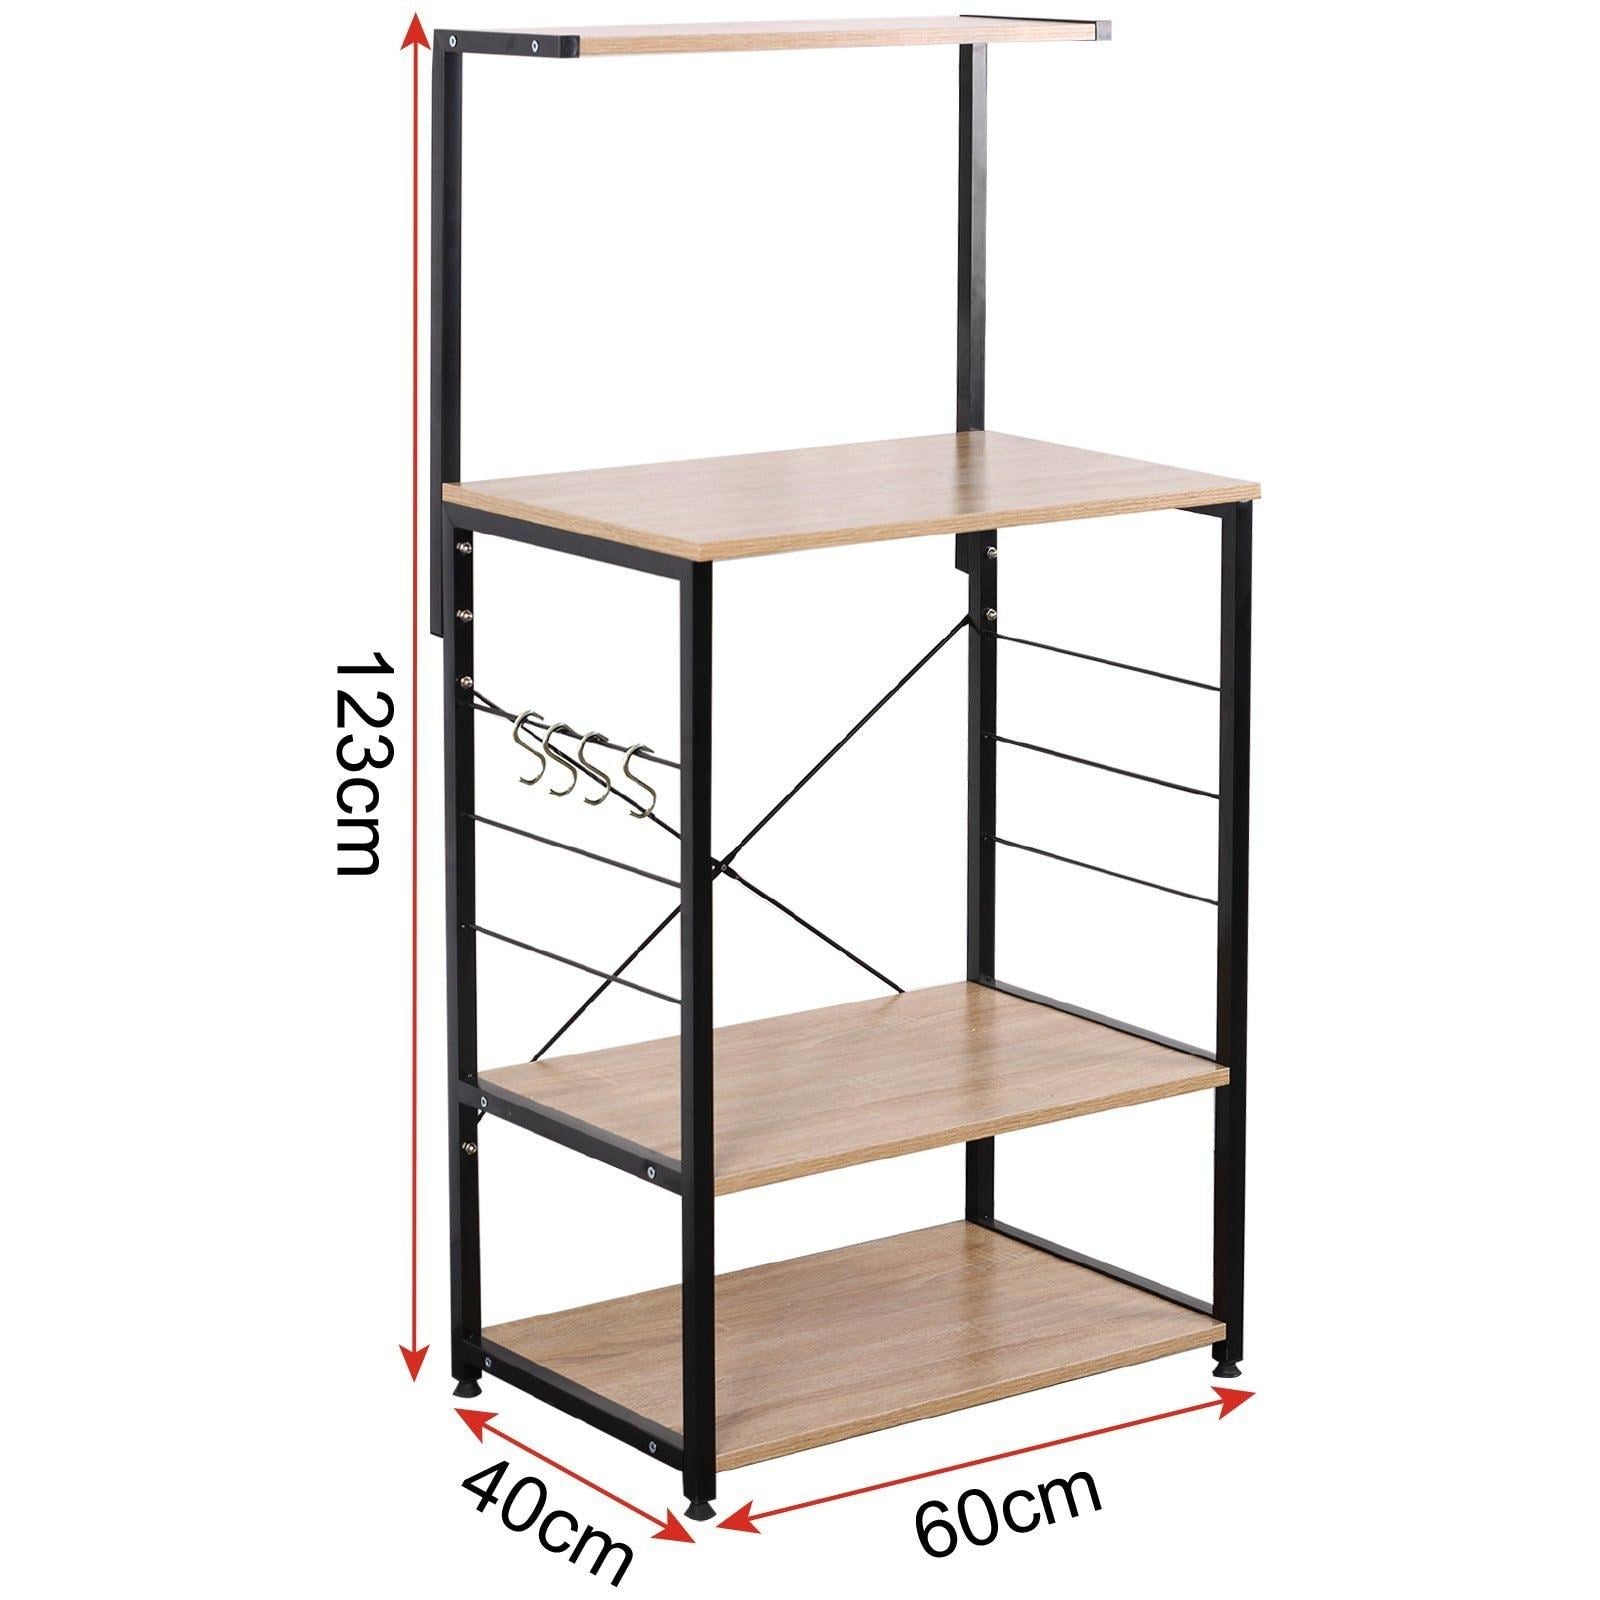 Latest woltu 4 tiers shelf kitchen storage display rack wooden and metal standing shelving unit for home bathroom use with 4 hooks